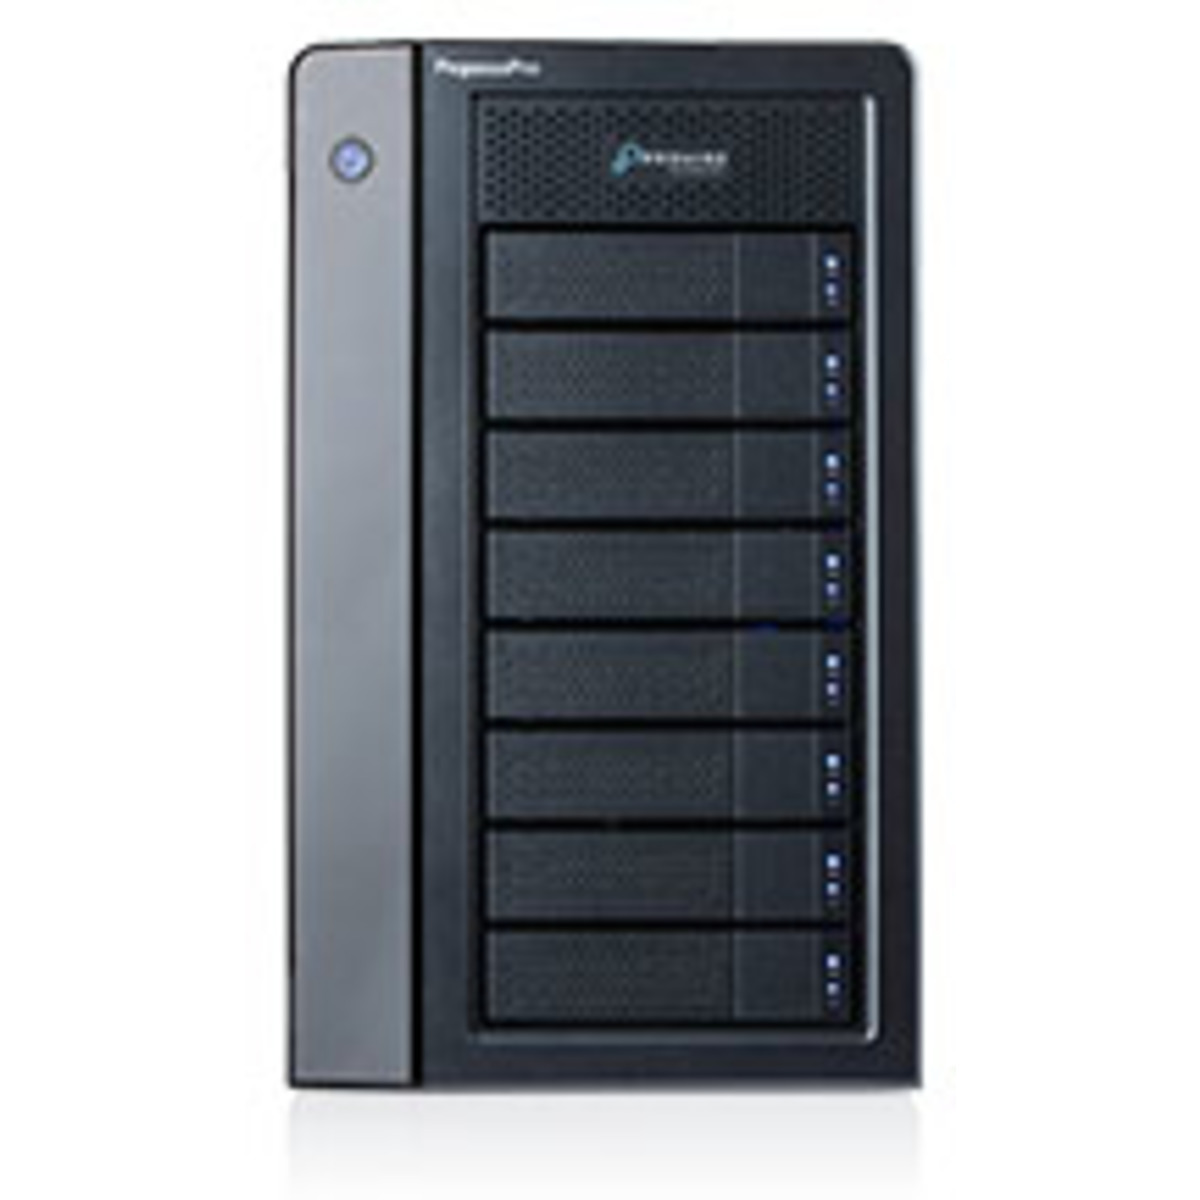 Promise Technology PegasusPro R8 70tb 8-Bay Desktop Multimedia / Power User / Business DAS-NAS - Combo Direct + Network Storage Device 5x14tb Western Digital Ultrastar DC HC530 WUH721414ALE6L4 3.5 7200rpm SATA 6Gb/s HDD ENTERPRISE Class Drives Installed - Burn-In Tested PegasusPro R8